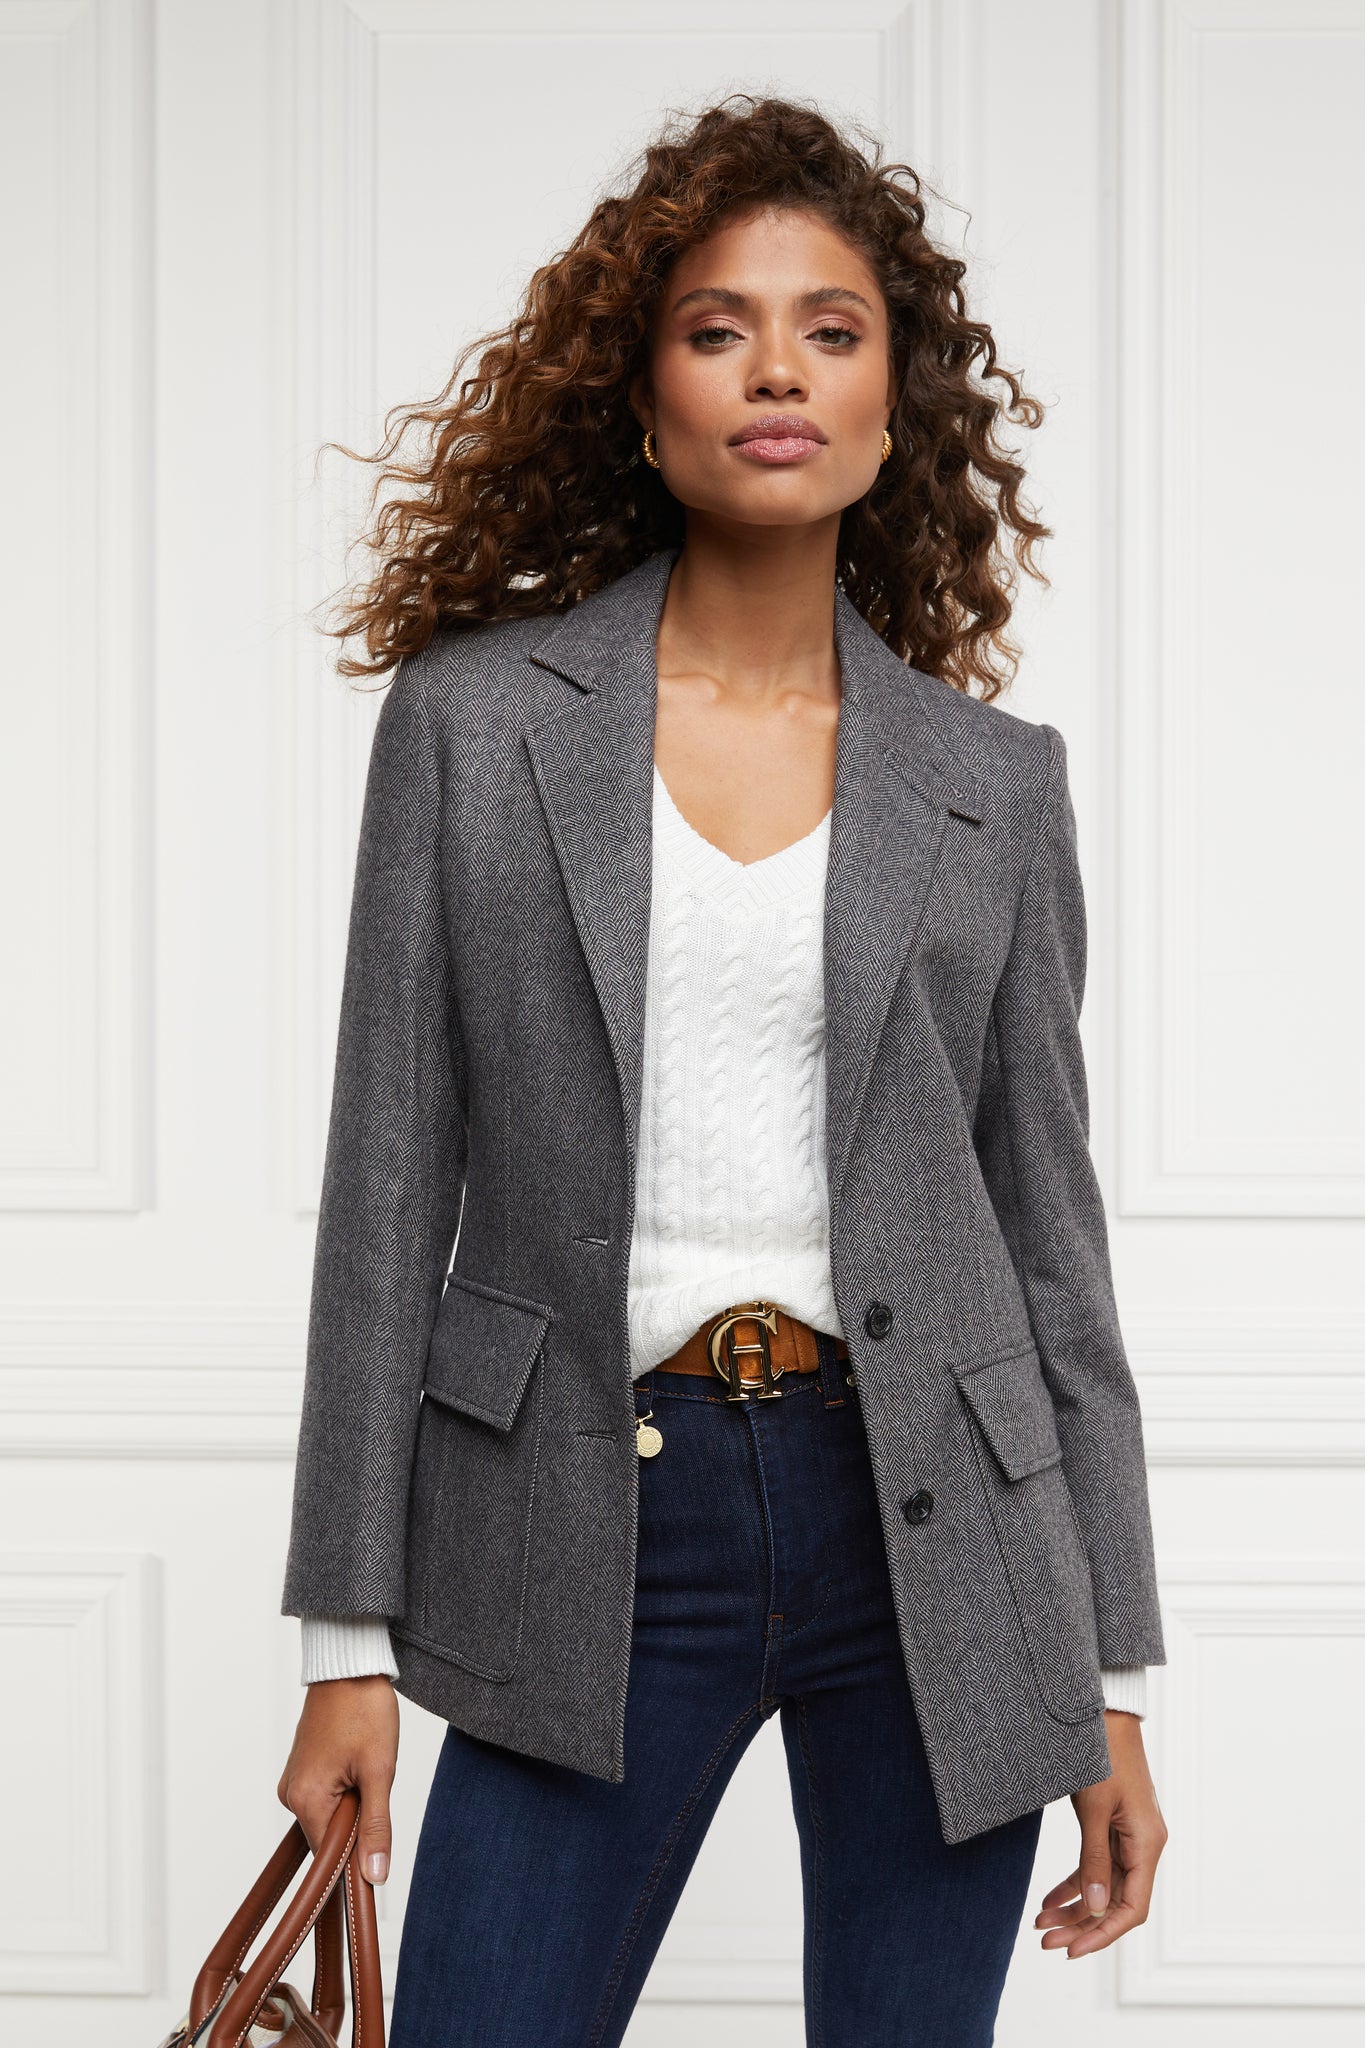 womens lightweight v neck cable knit jumper in white detailed with gold buttons at the cuffs worn under a grey herringbone single breasted blazer